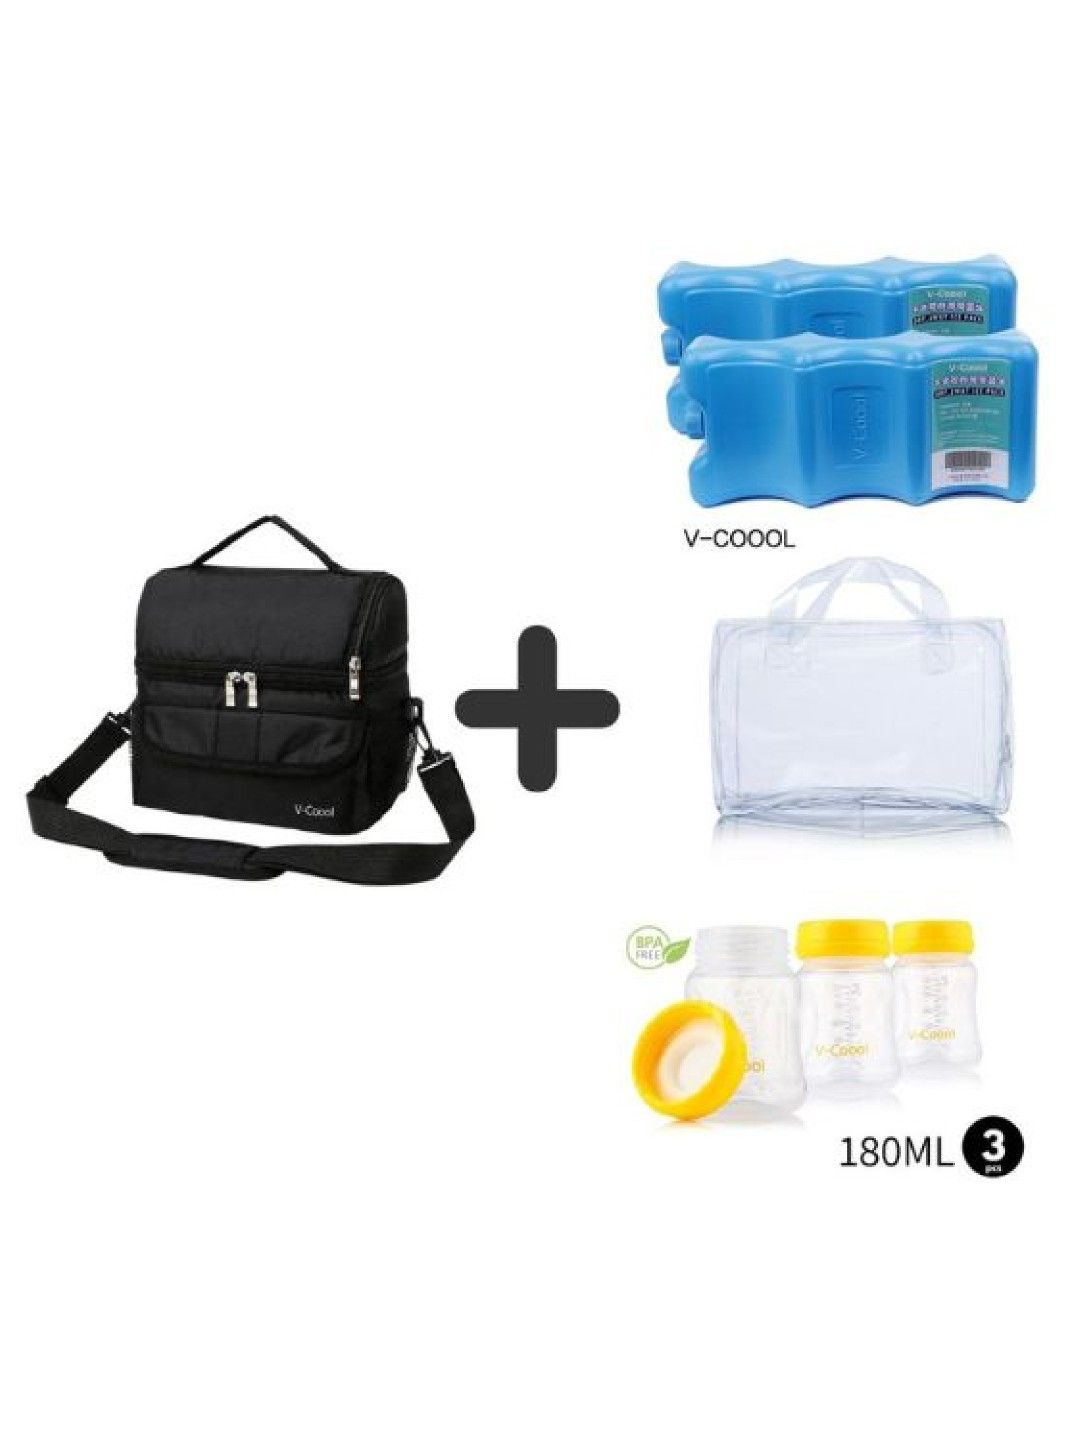 V-coool Thermal Cooler Tote Insulated Bag with Ice Bricks, Bottles & PVC Bag